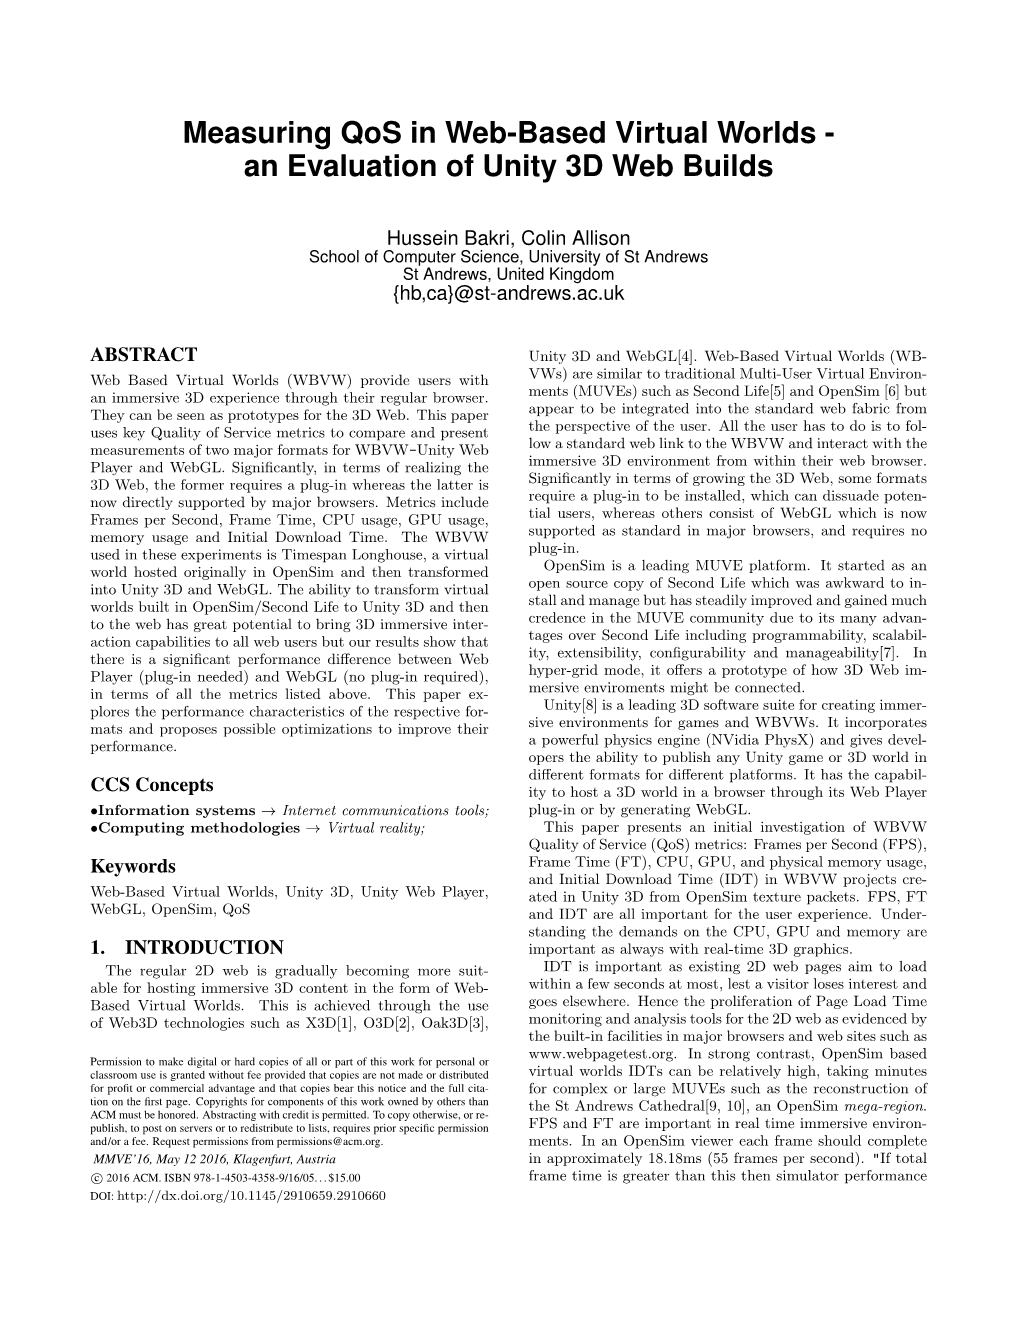 Measuring Qos in Web-Based Virtual Worlds - an Evaluation of Unity 3D Web Builds